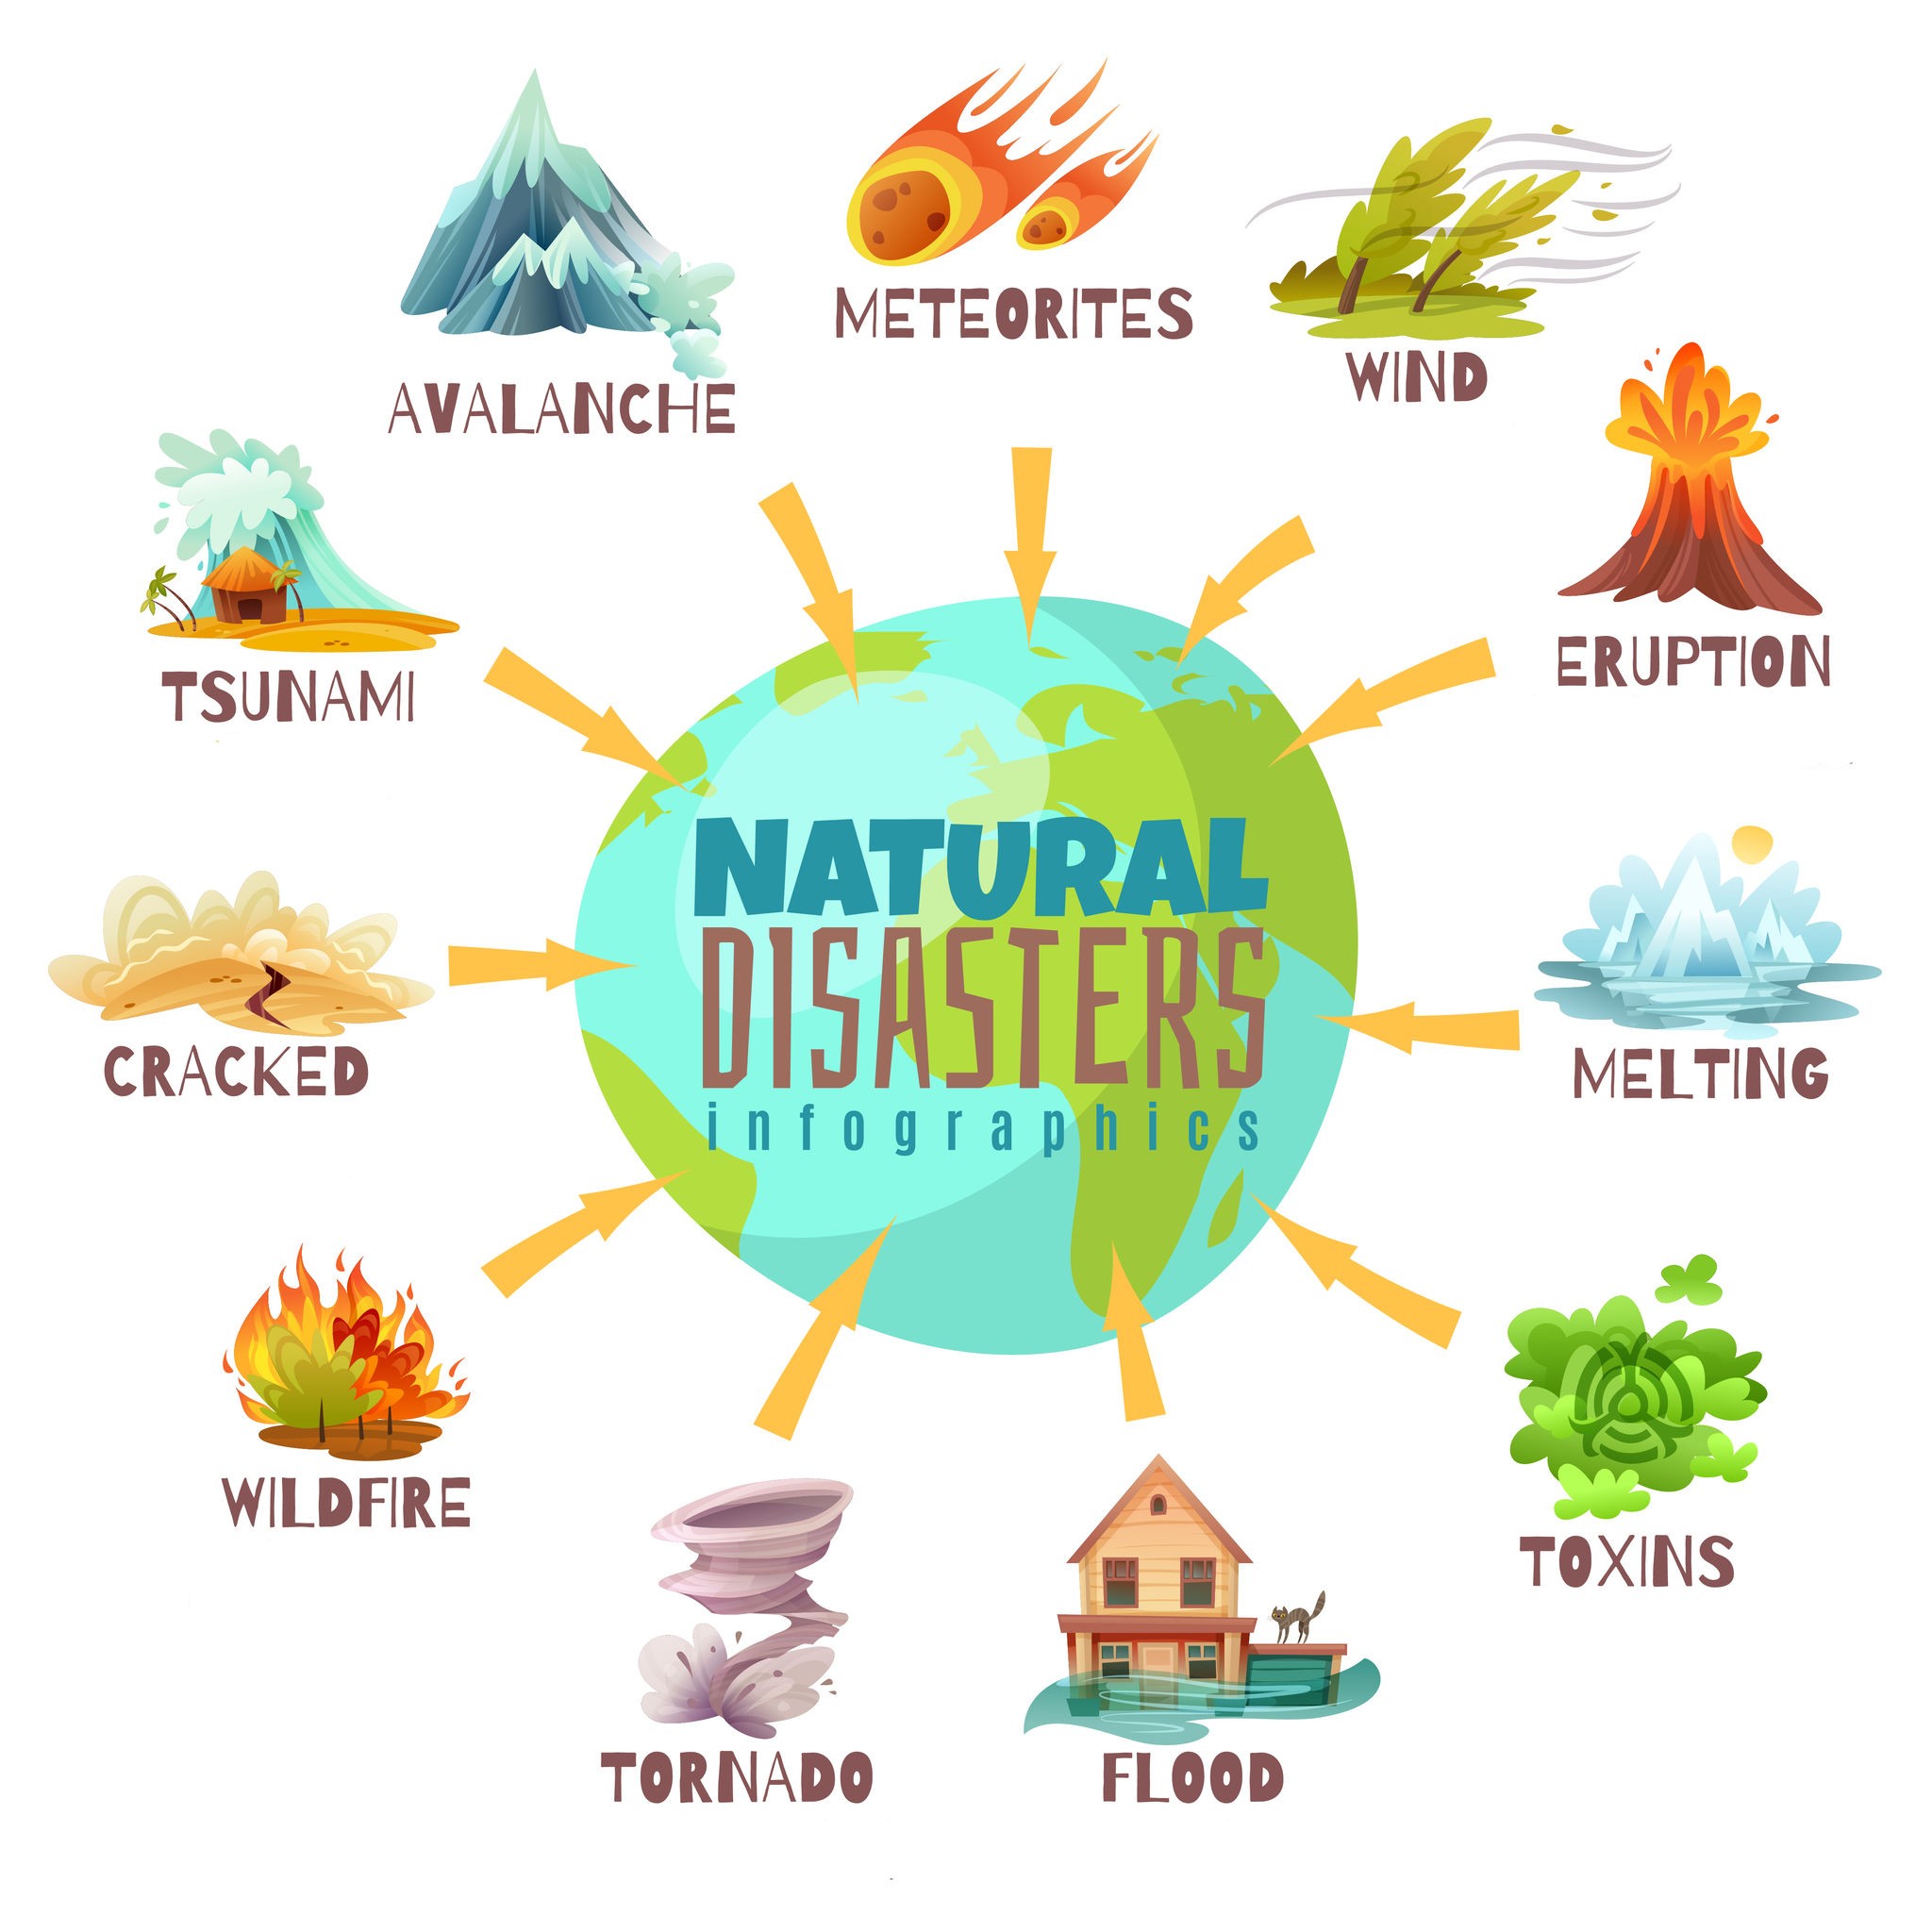 research topics about natural disasters